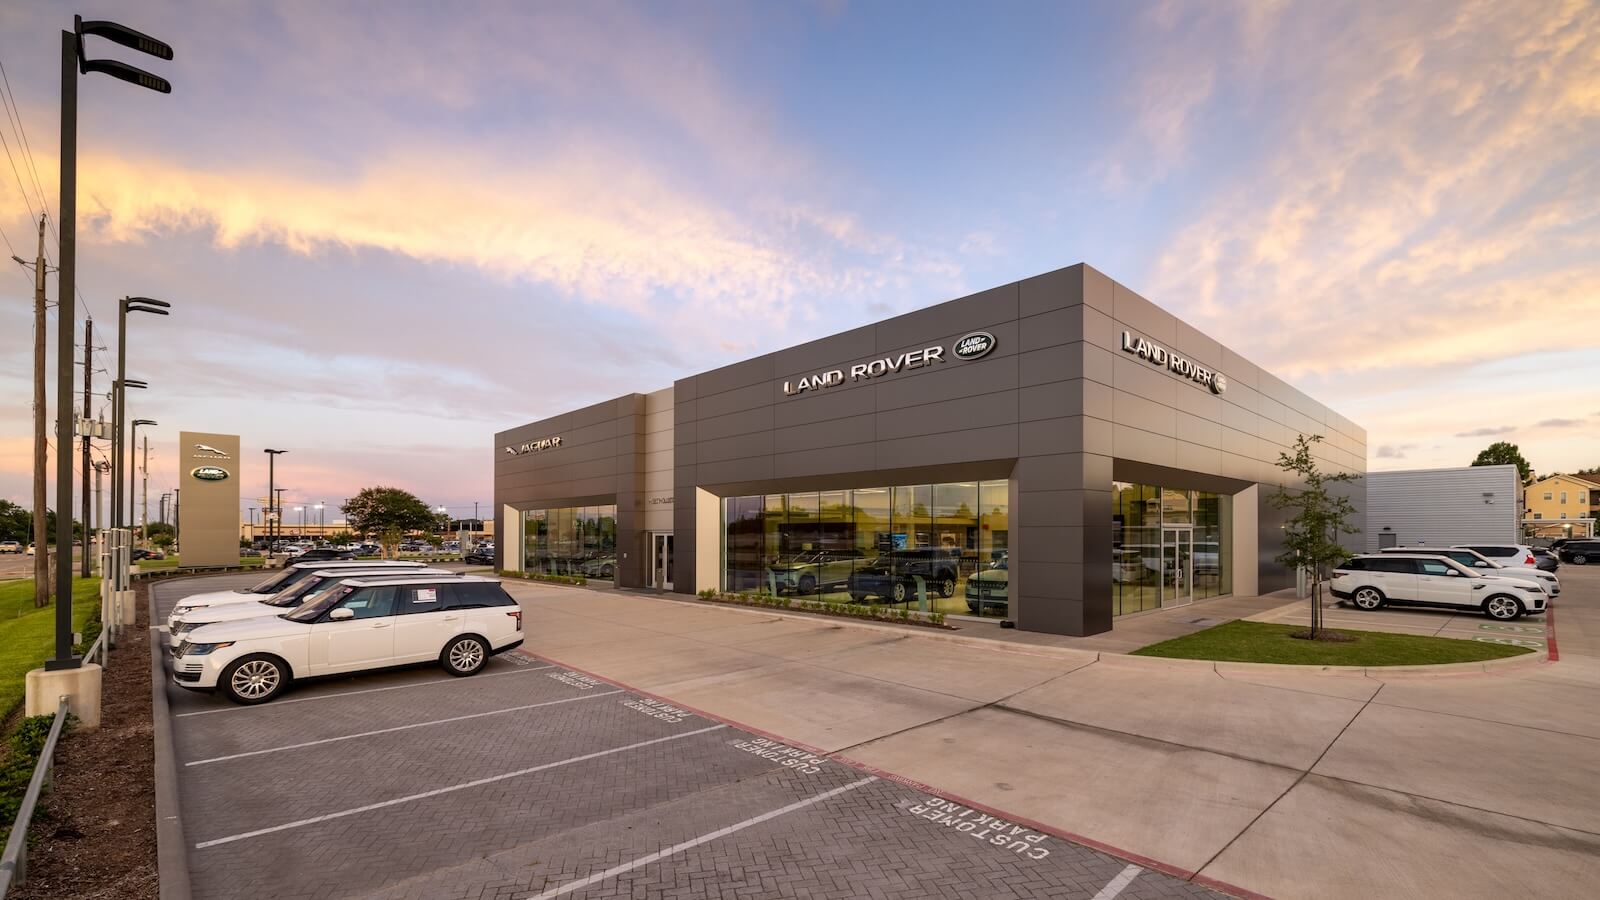 Exterior view of Land Rover West Houston